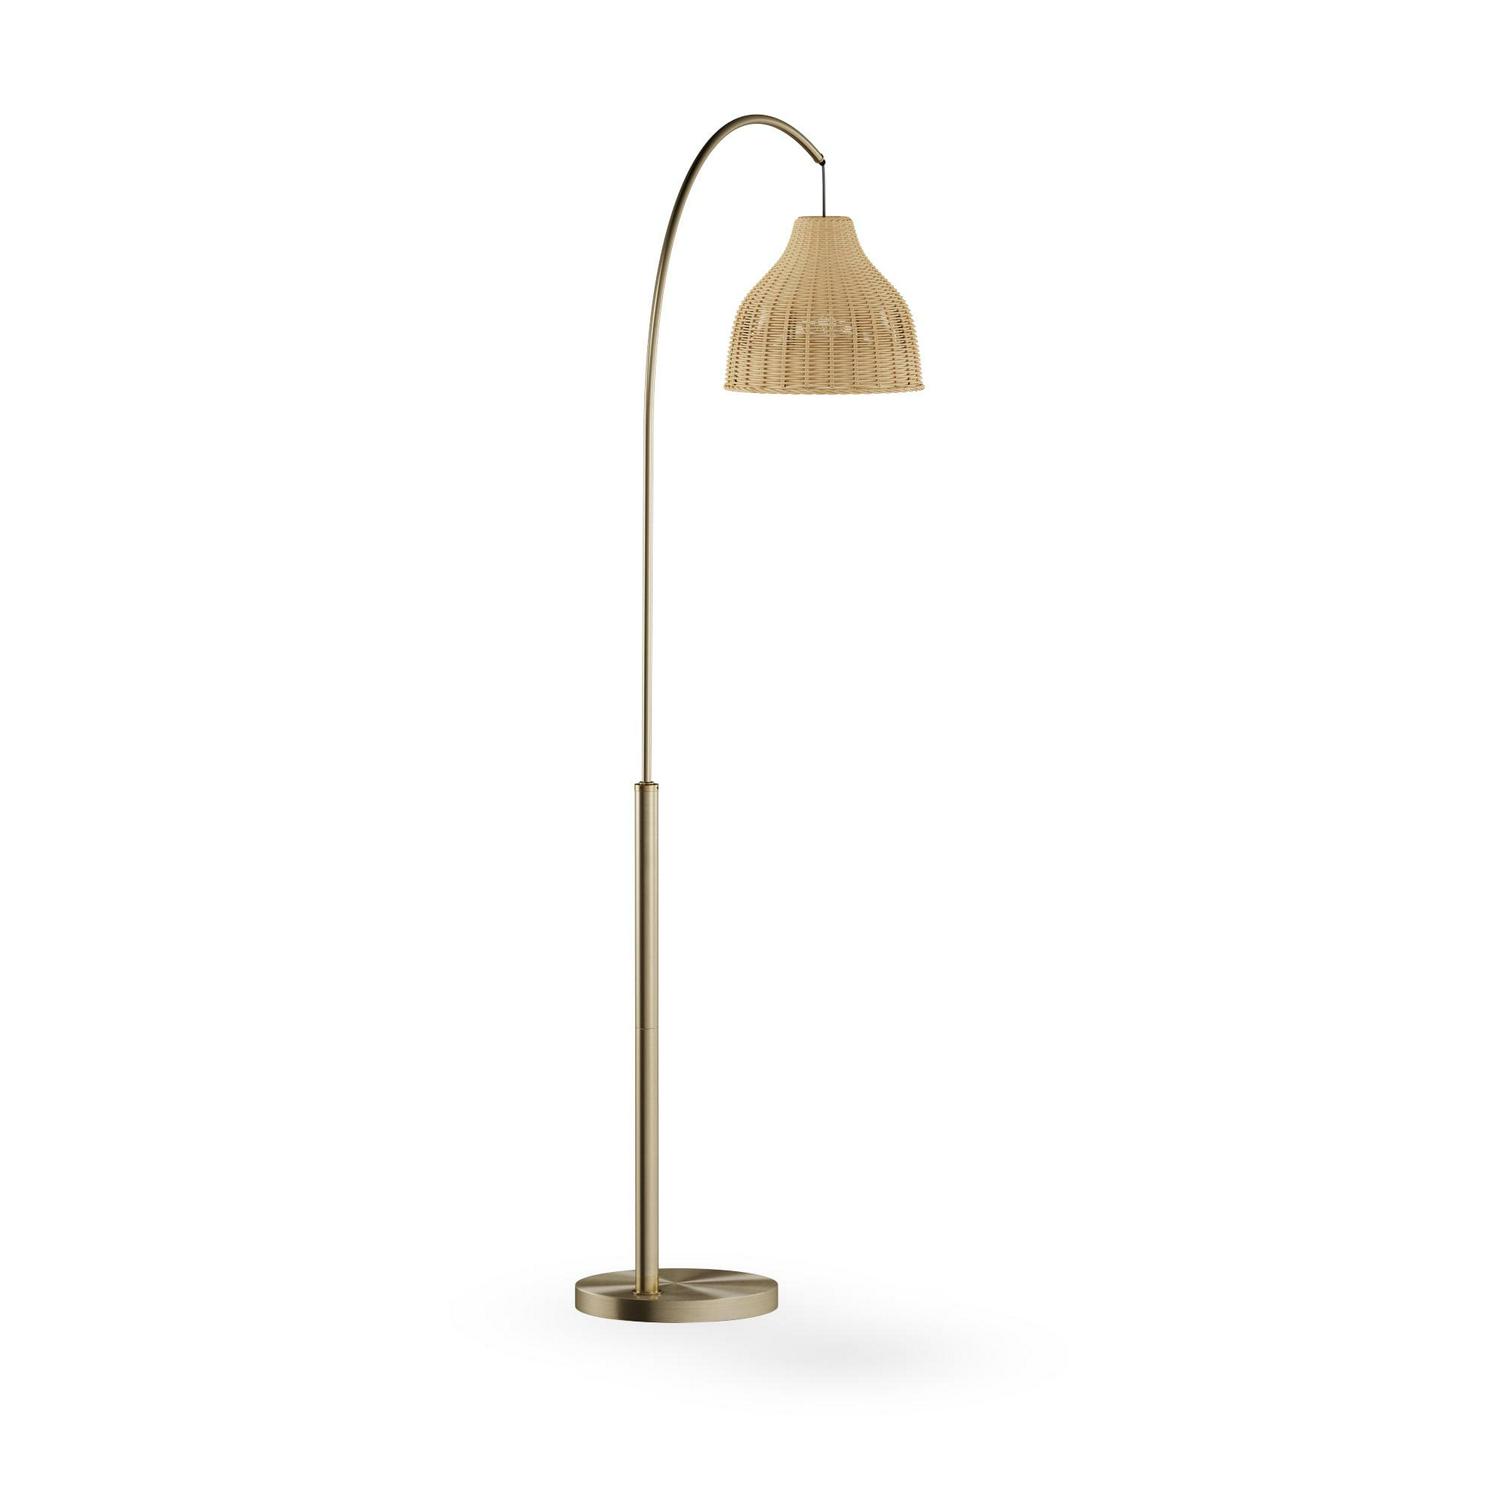 Arch Floor Lamp with Rattan Shade by Drew Barrymore Flower Home， Antique Brass